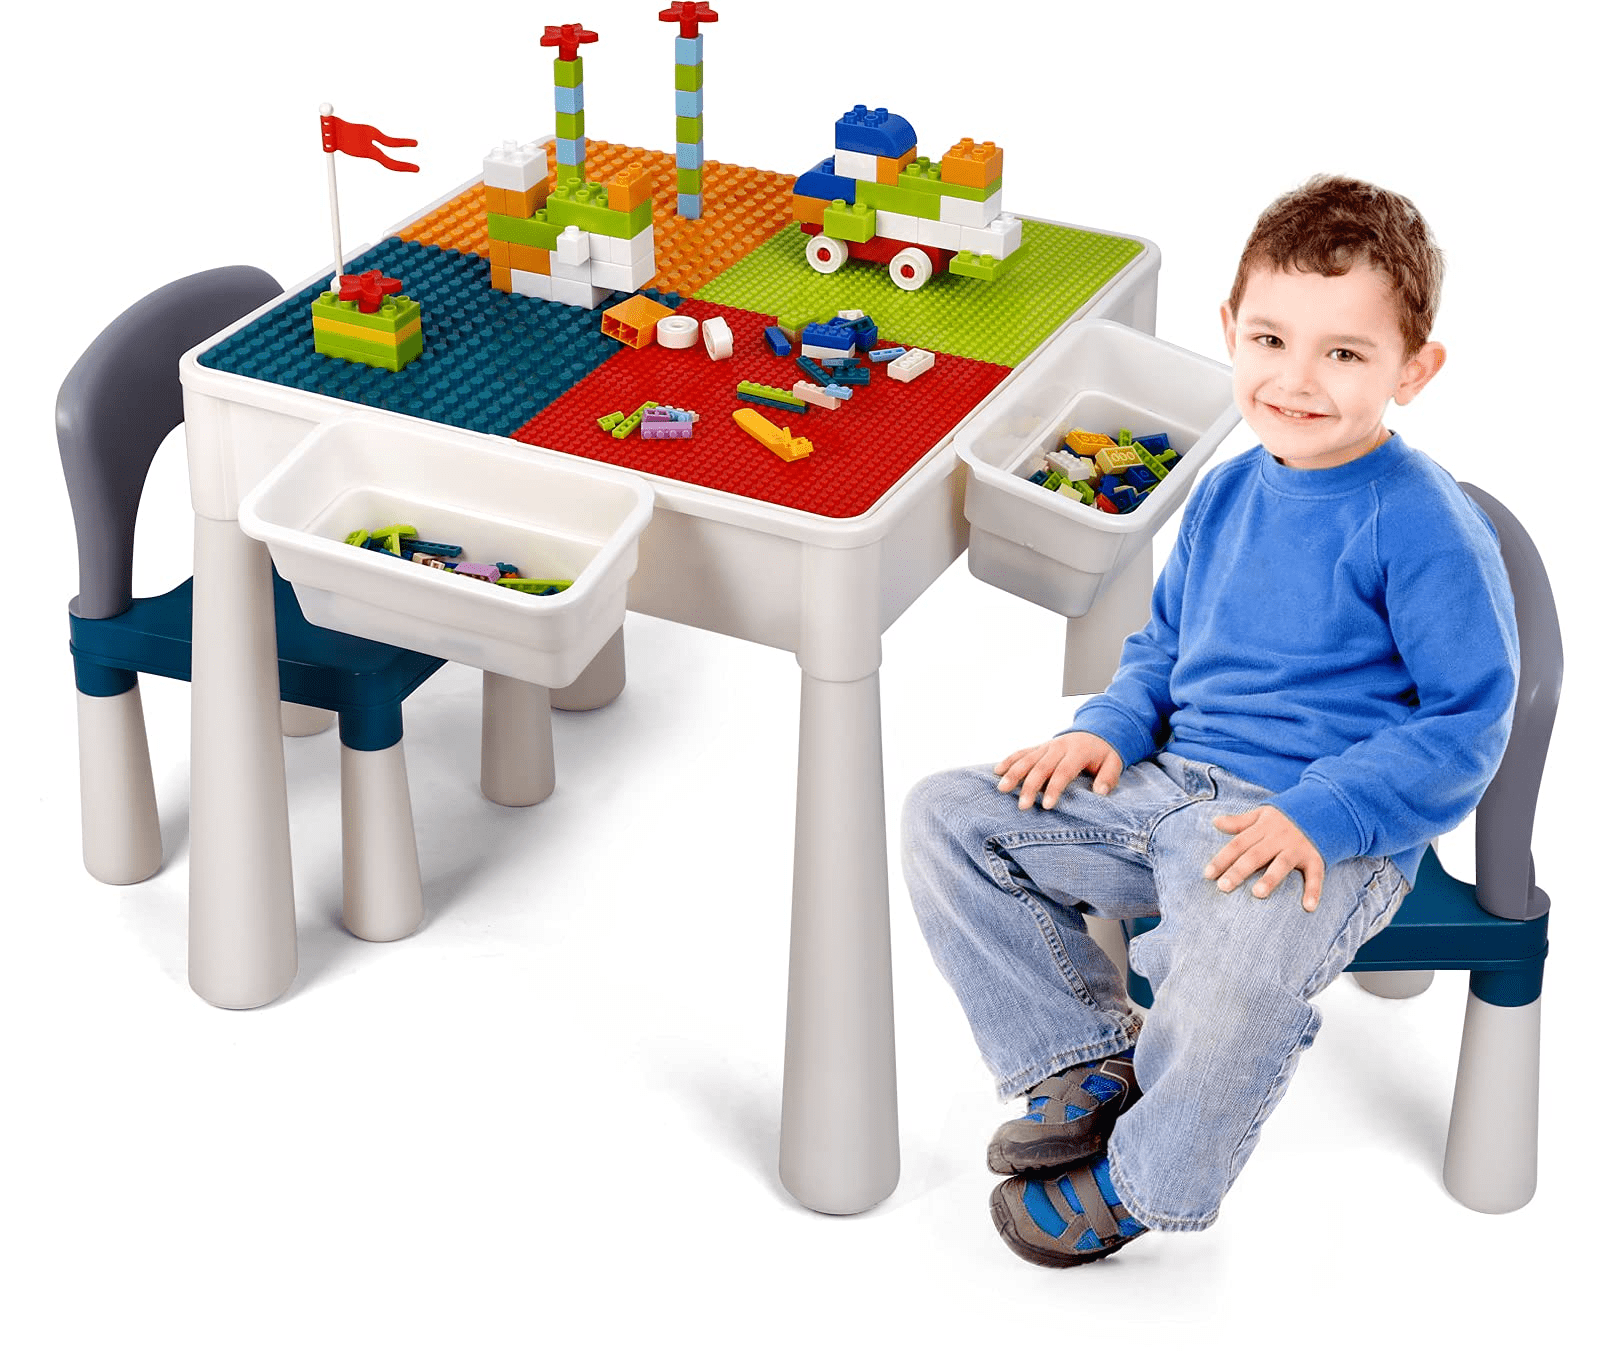 Details about   6 in 1 Kids Activity Table Set with Chair Baby Toddler Play Toys Room Study Dine 